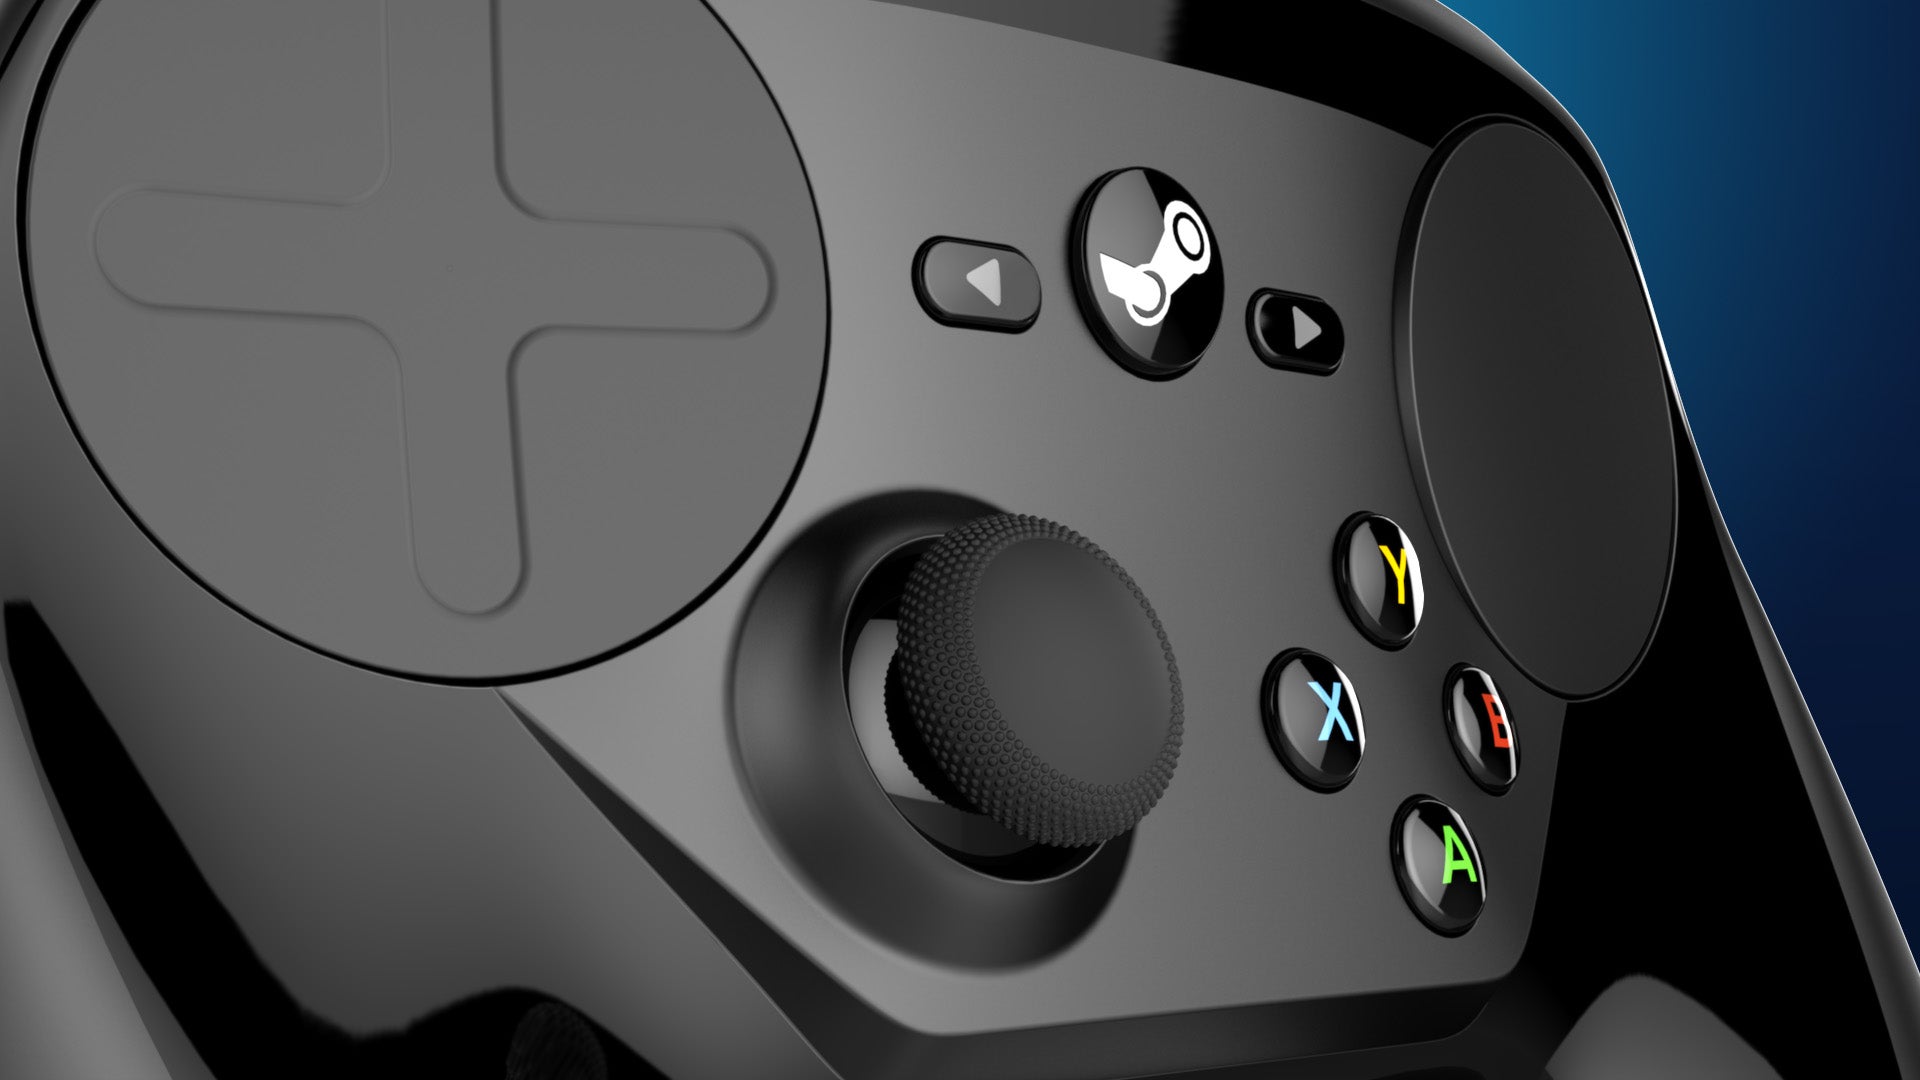 Image for The Steam Controller has sold nearly 1 million units